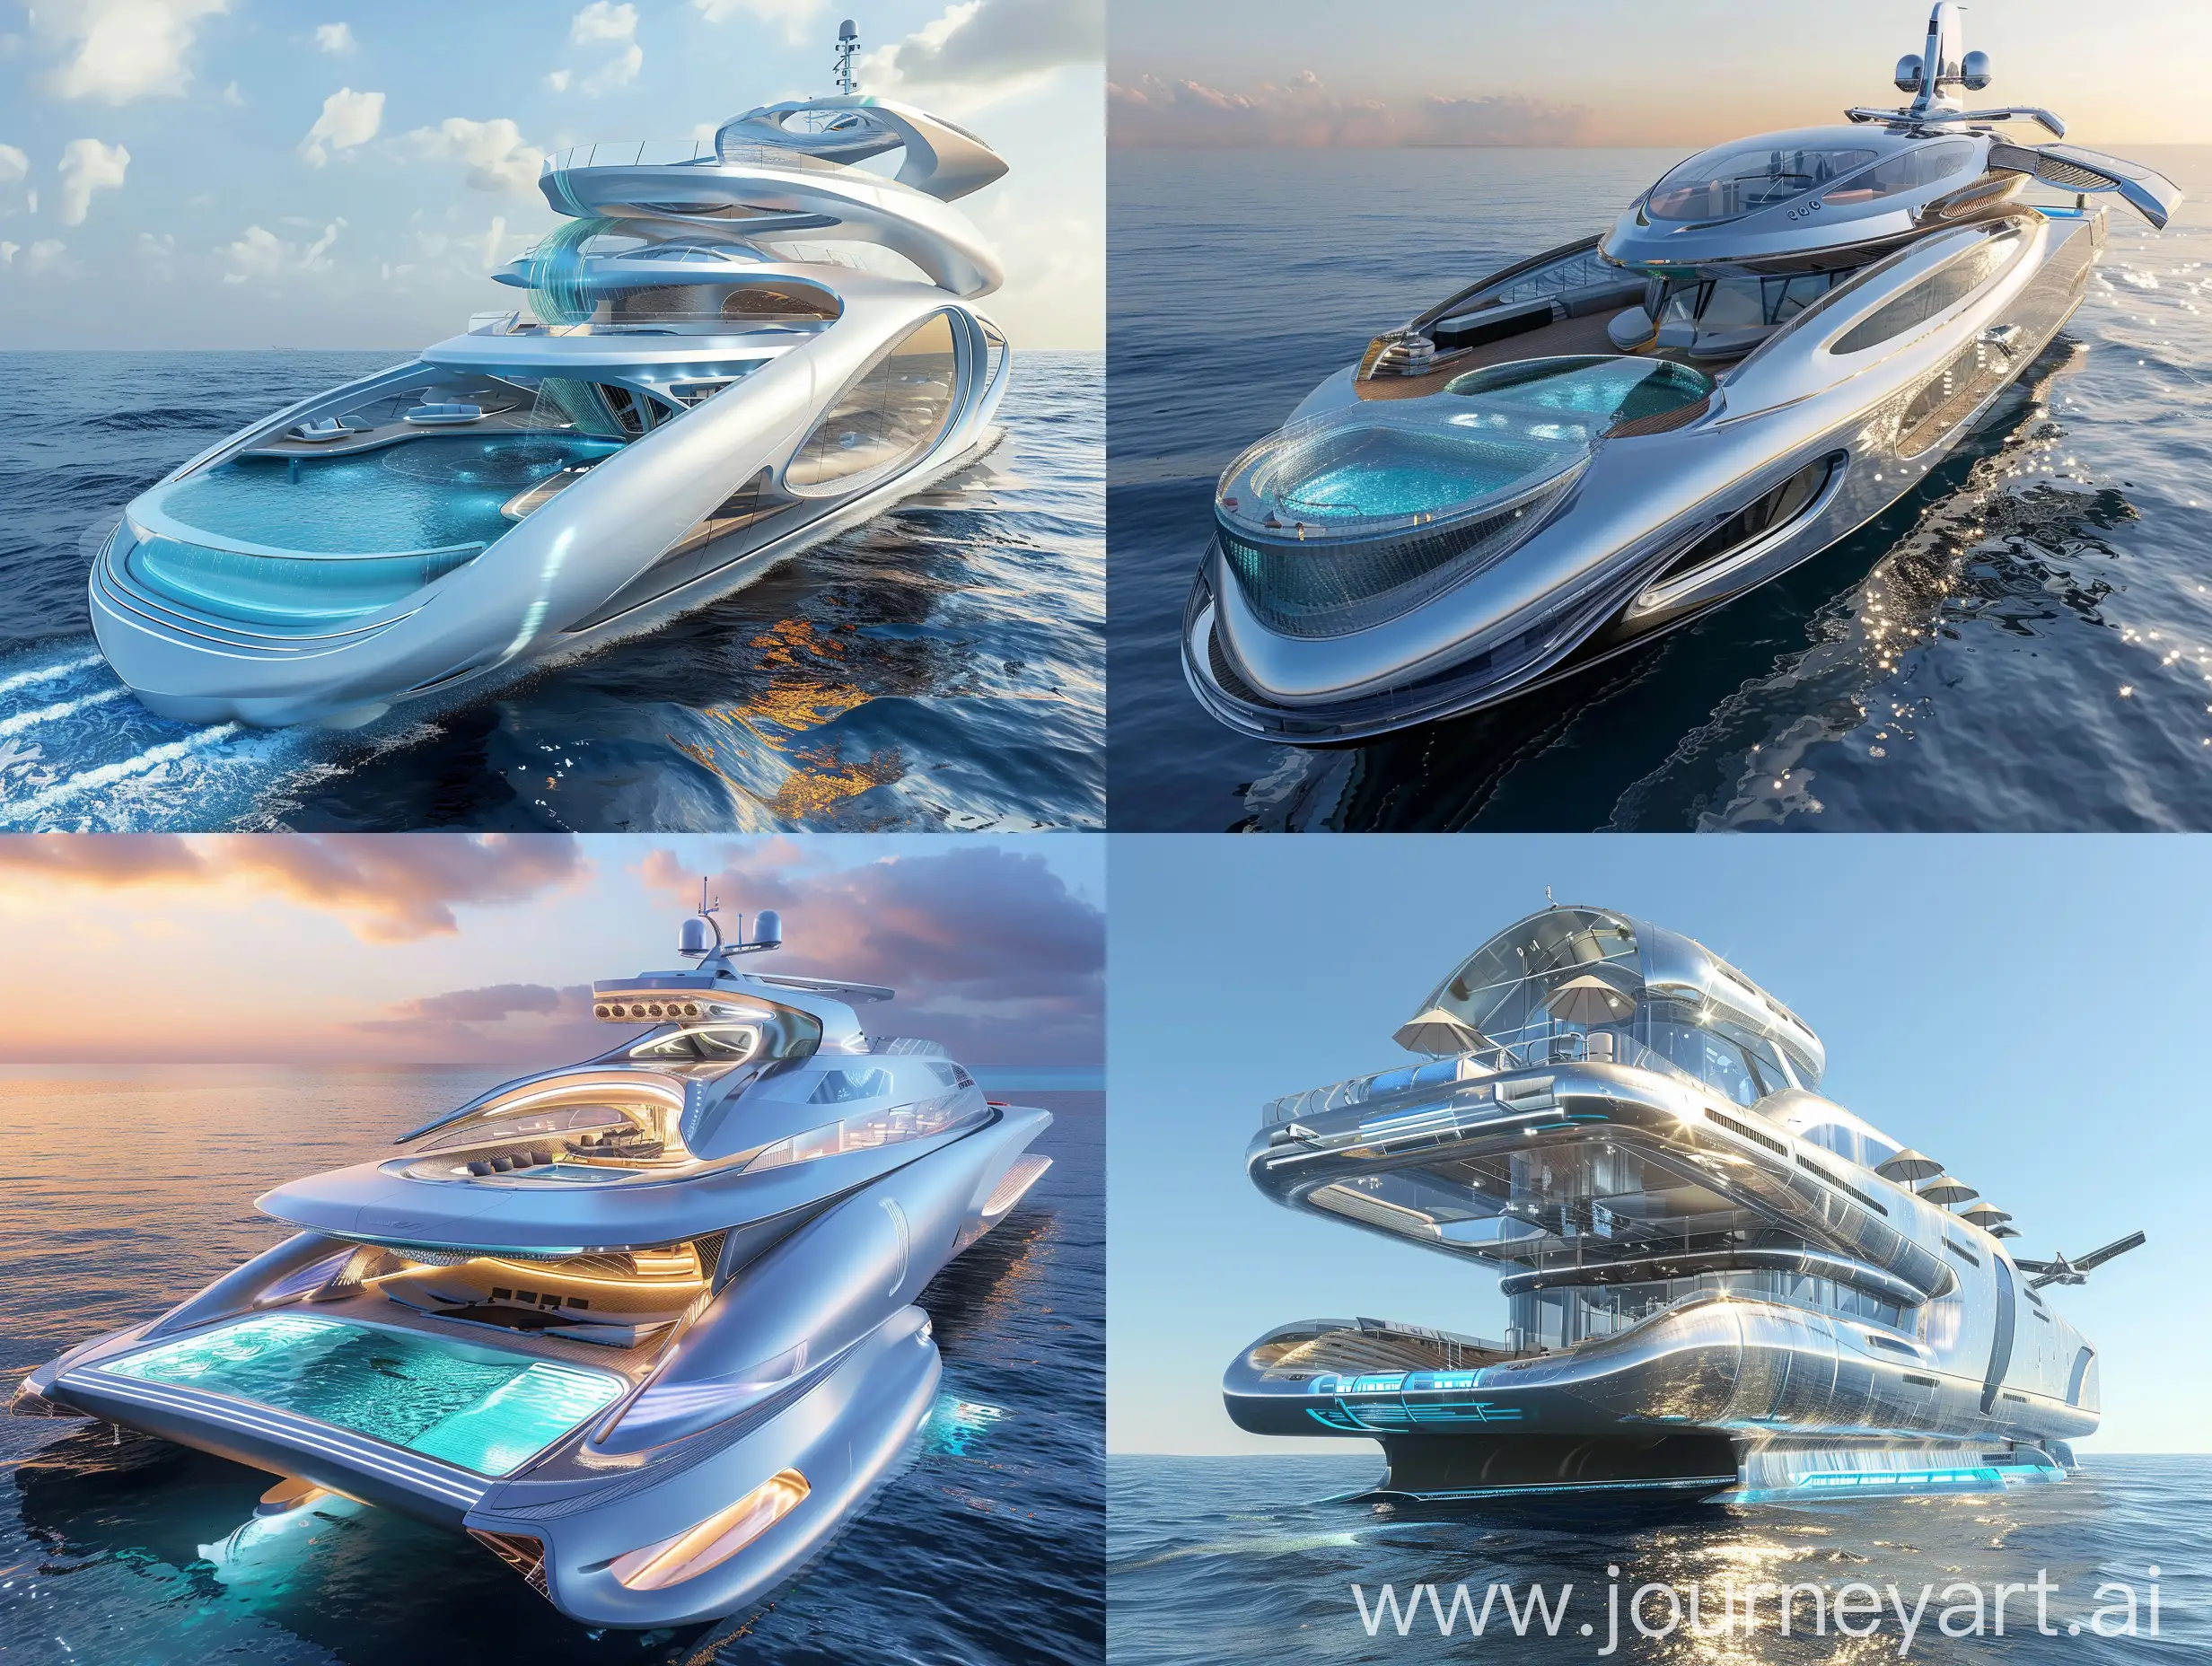 Luxurious-Hydrofoil-Yacht-with-Transparent-Hull-and-Biomorphic-Design